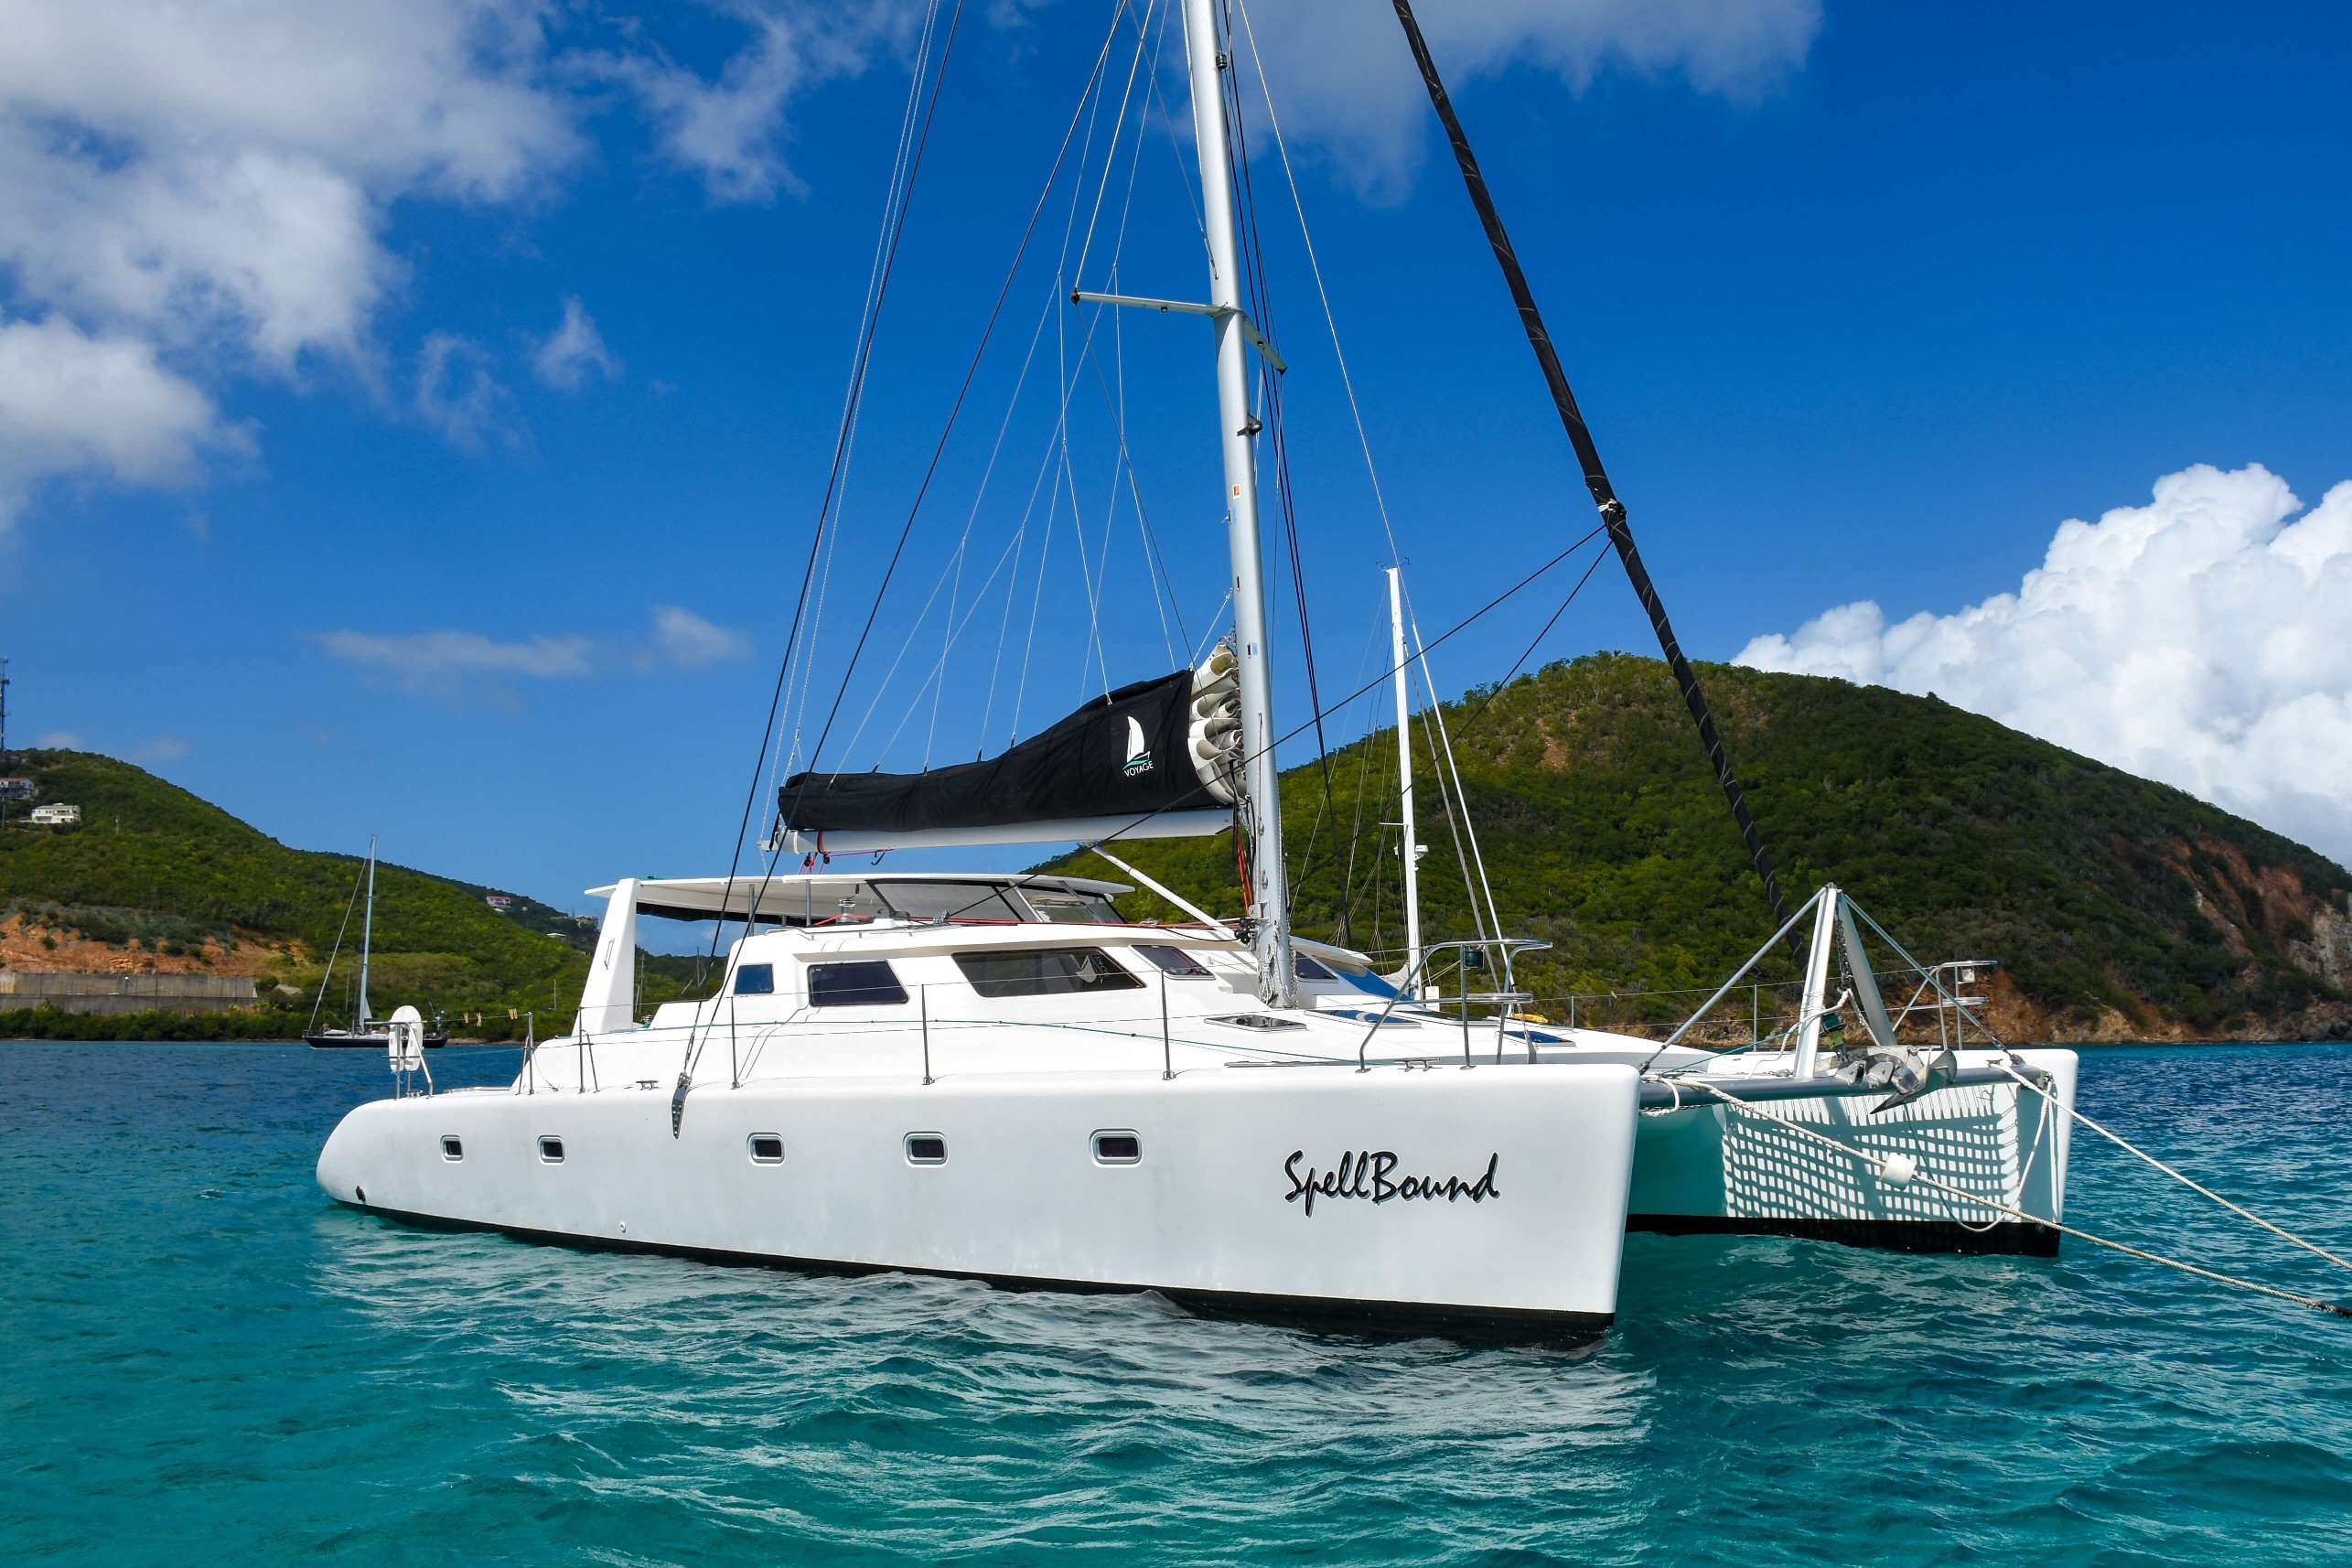 Used Sail Catamaran for Sale 2006 Voyage 500 Boat Highlights